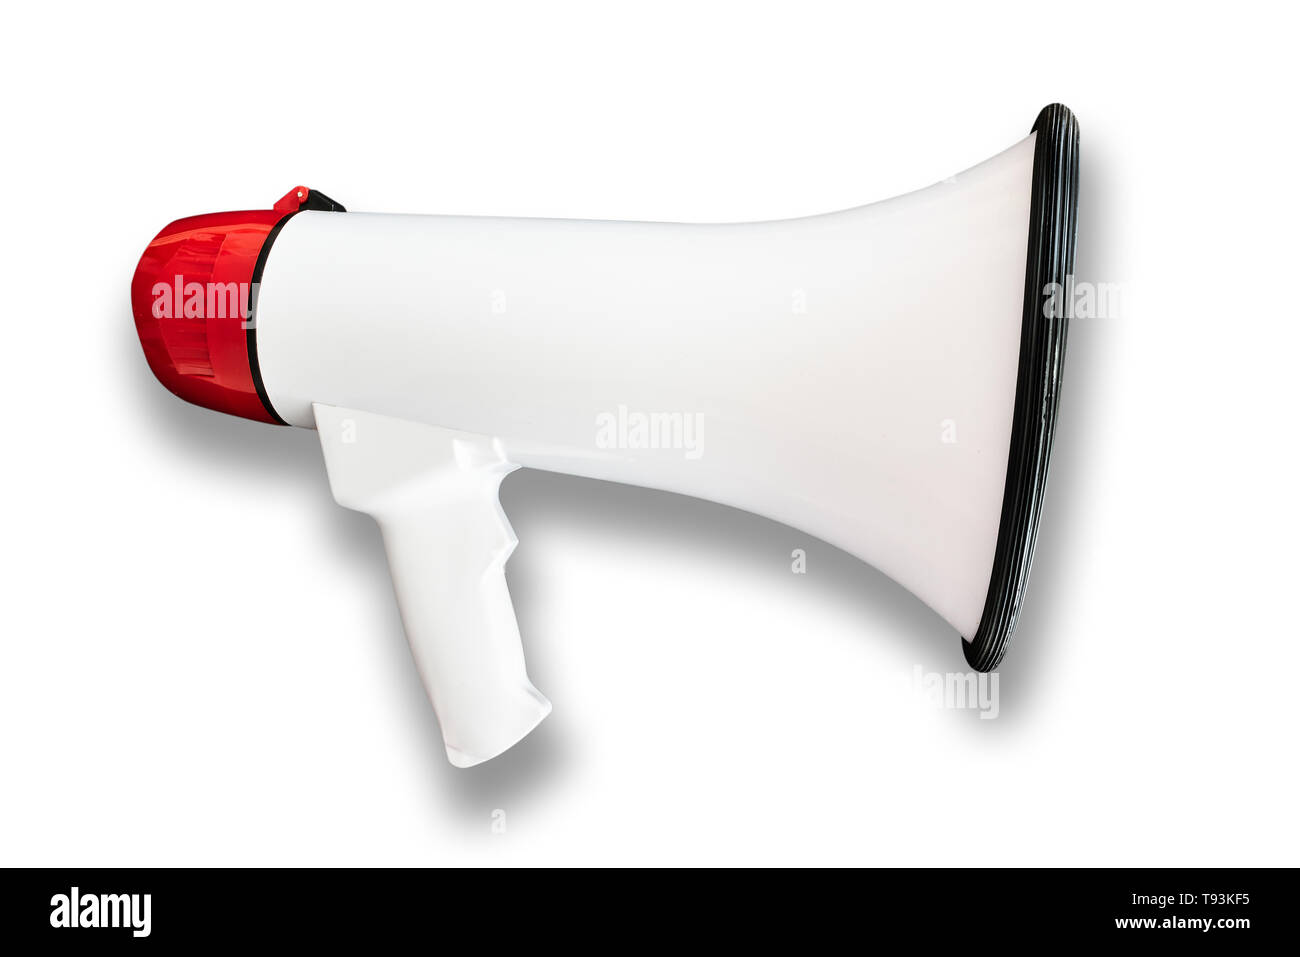 red and white megaphone or bullhorn isolated on white background Stock Photo